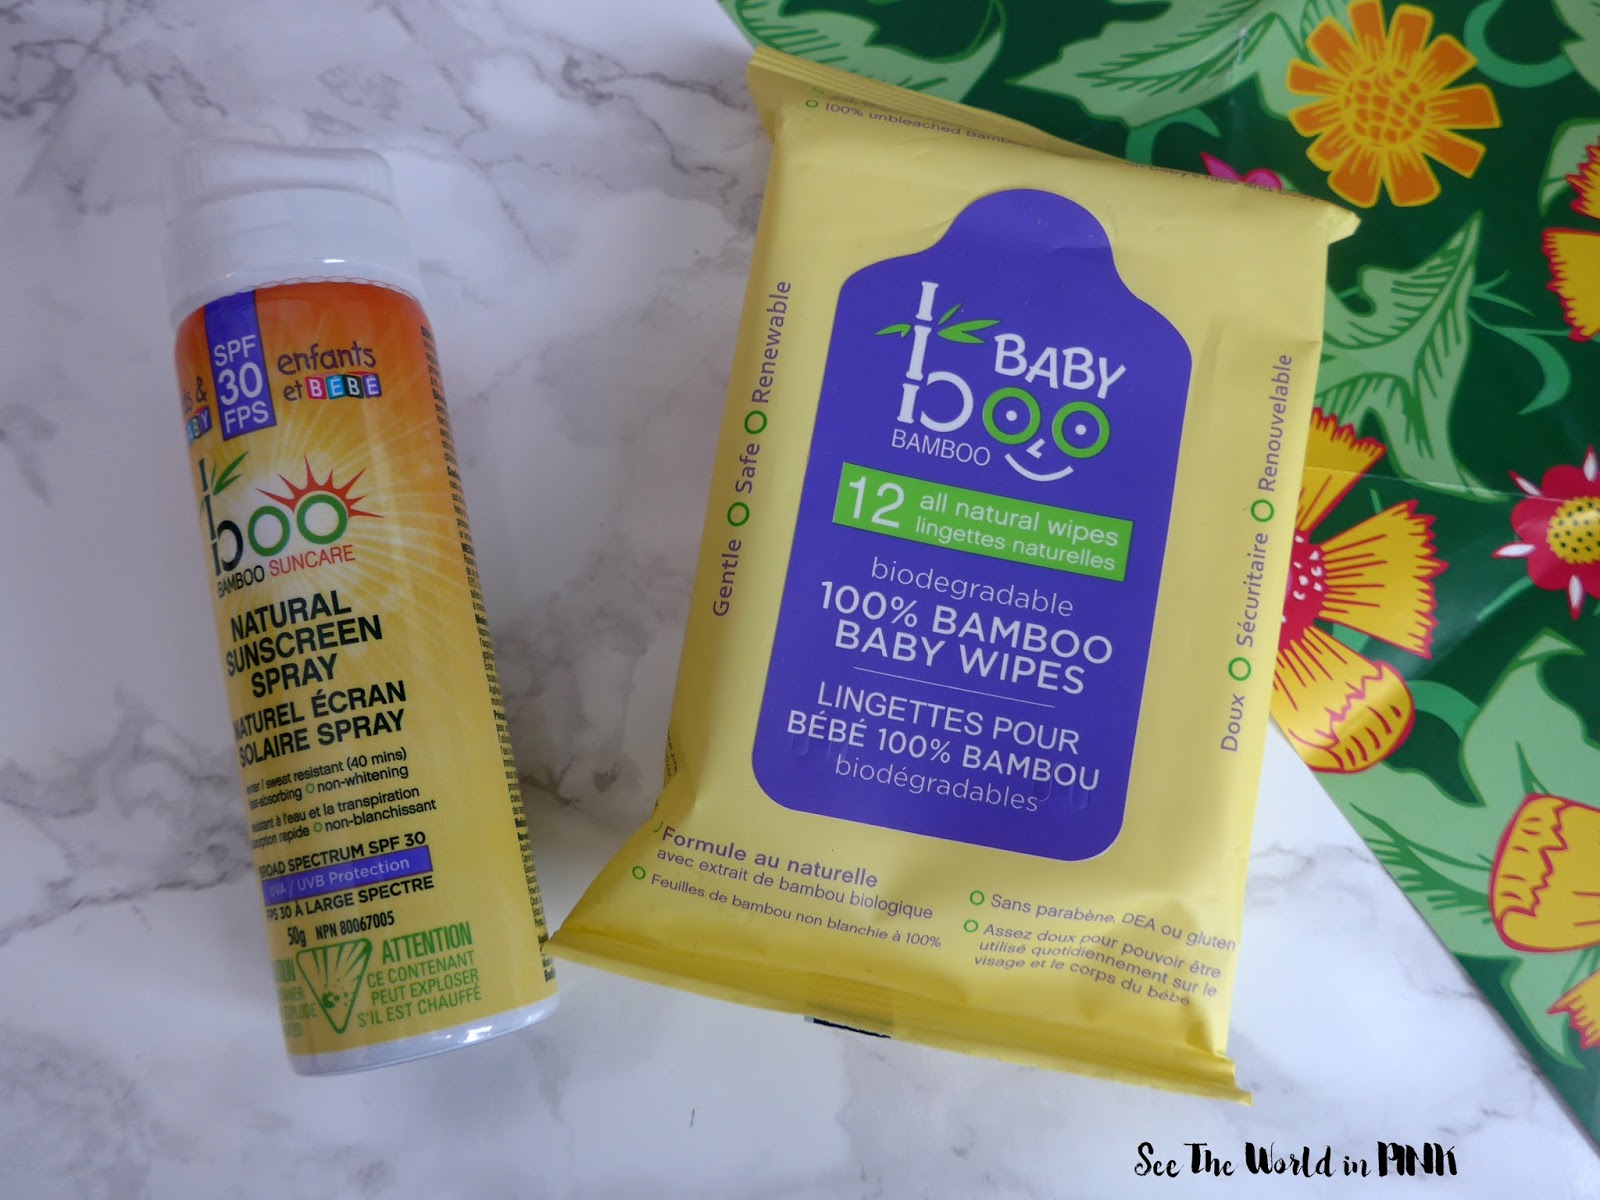 Skincare Sunday - Natural, Organic and Cruelty-free Products for Babies! 